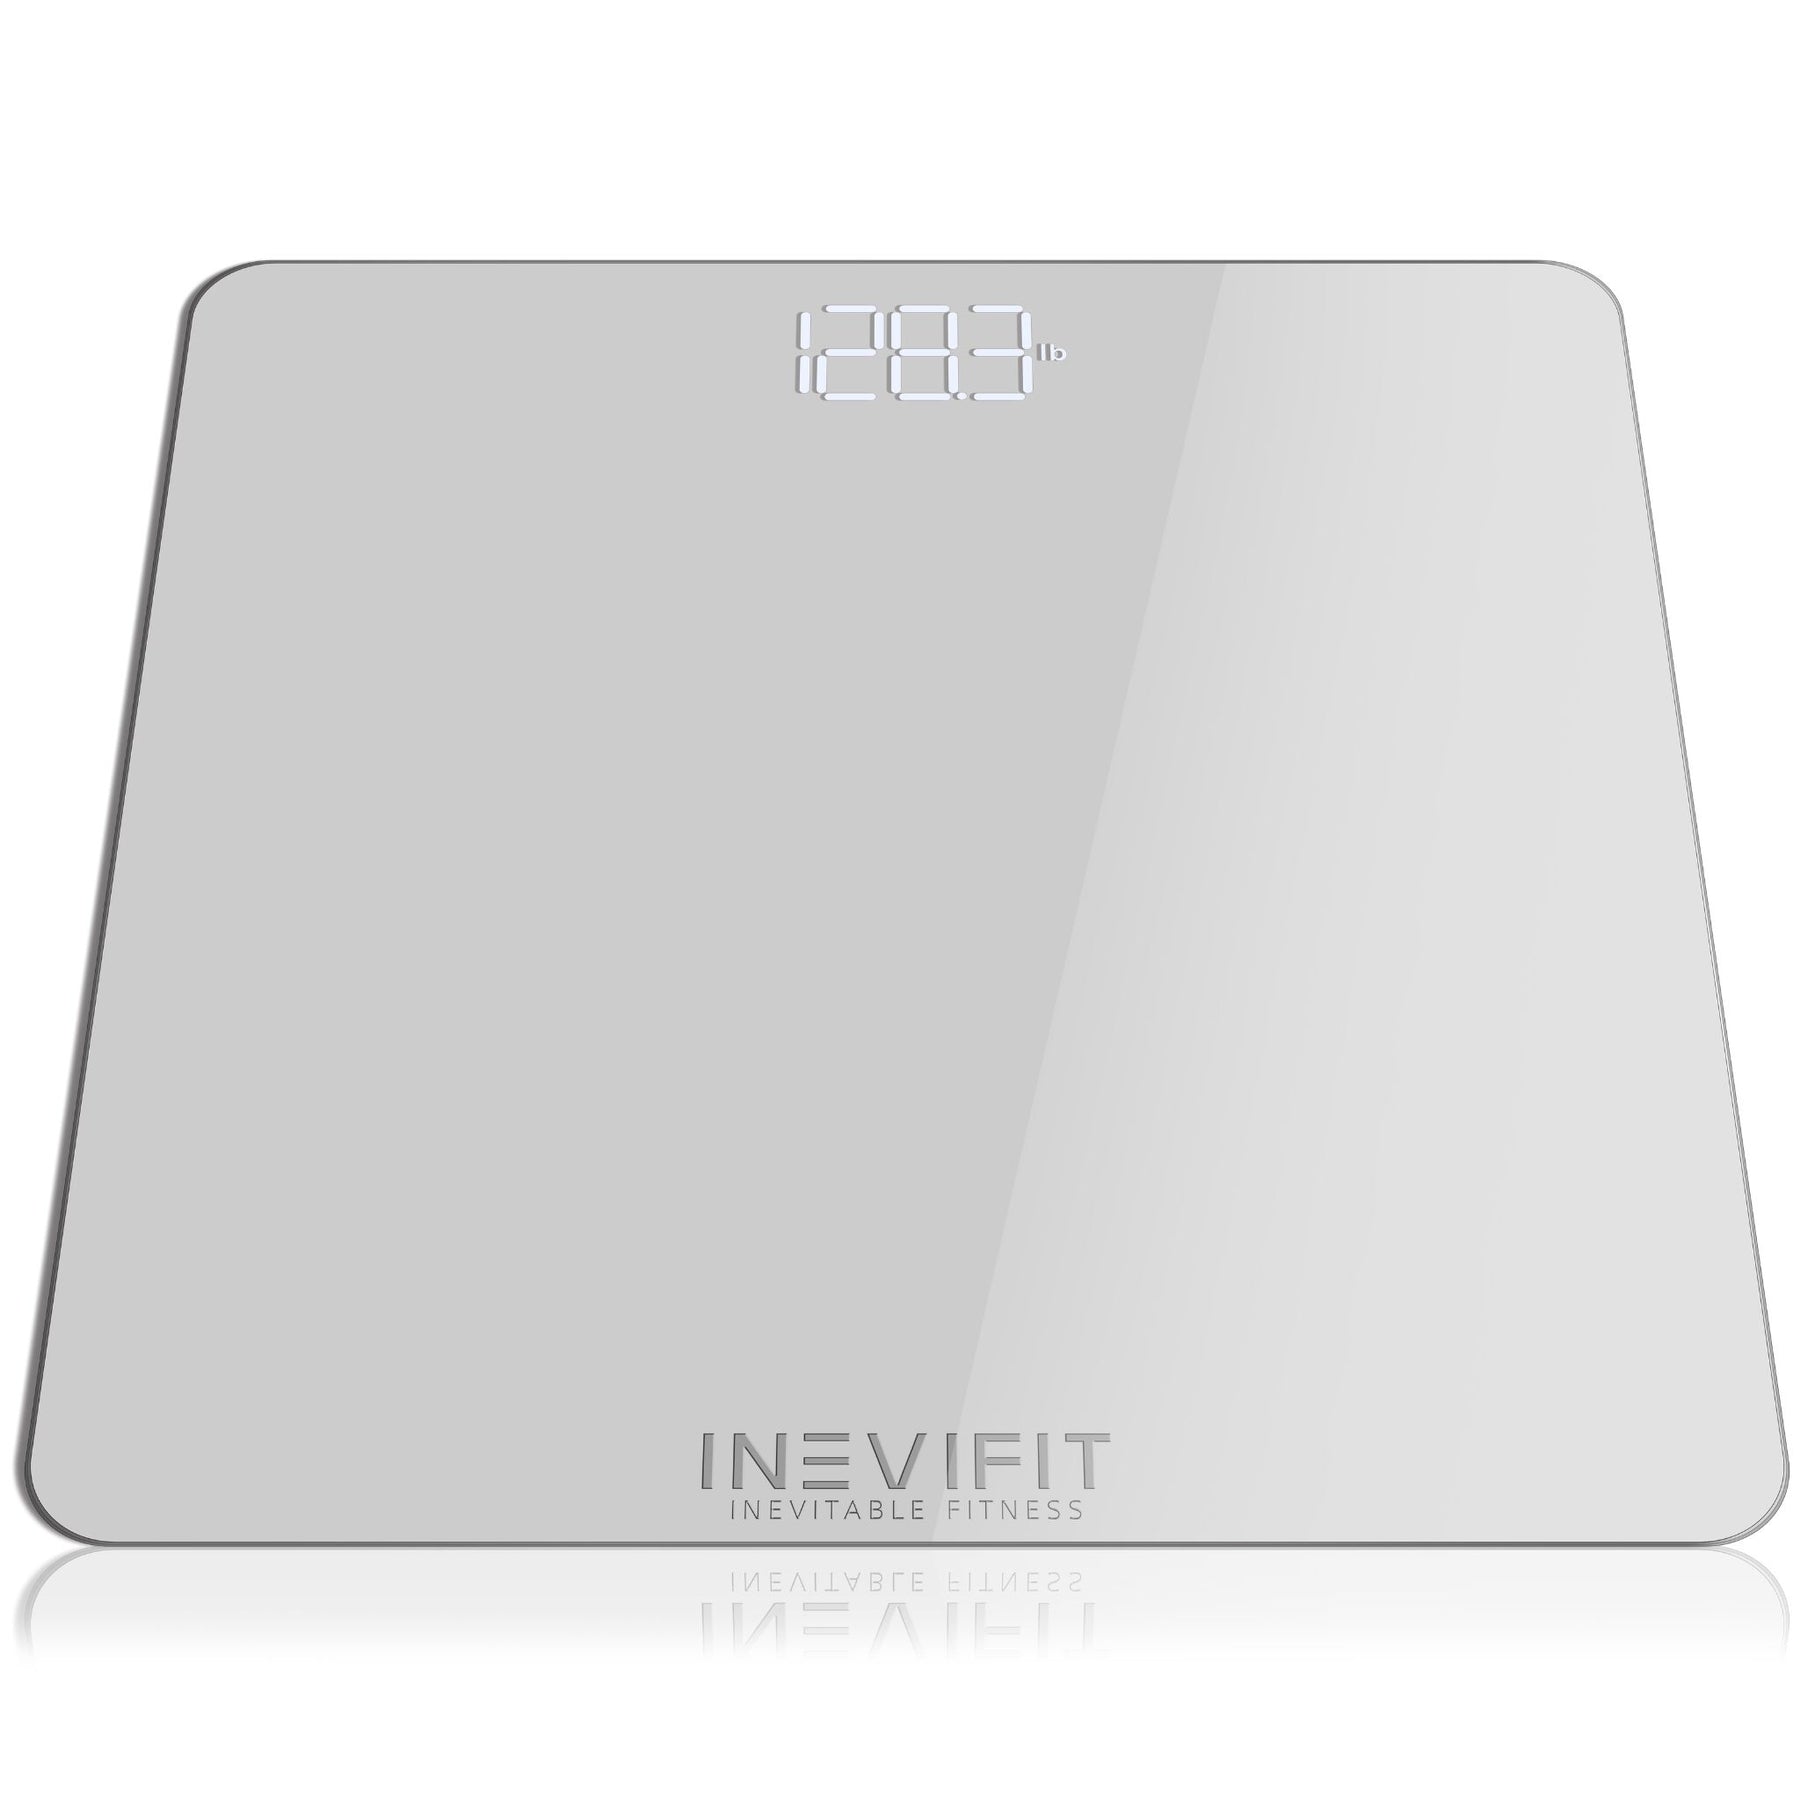 INEVIFIT | Smart Body Weight Scale, White